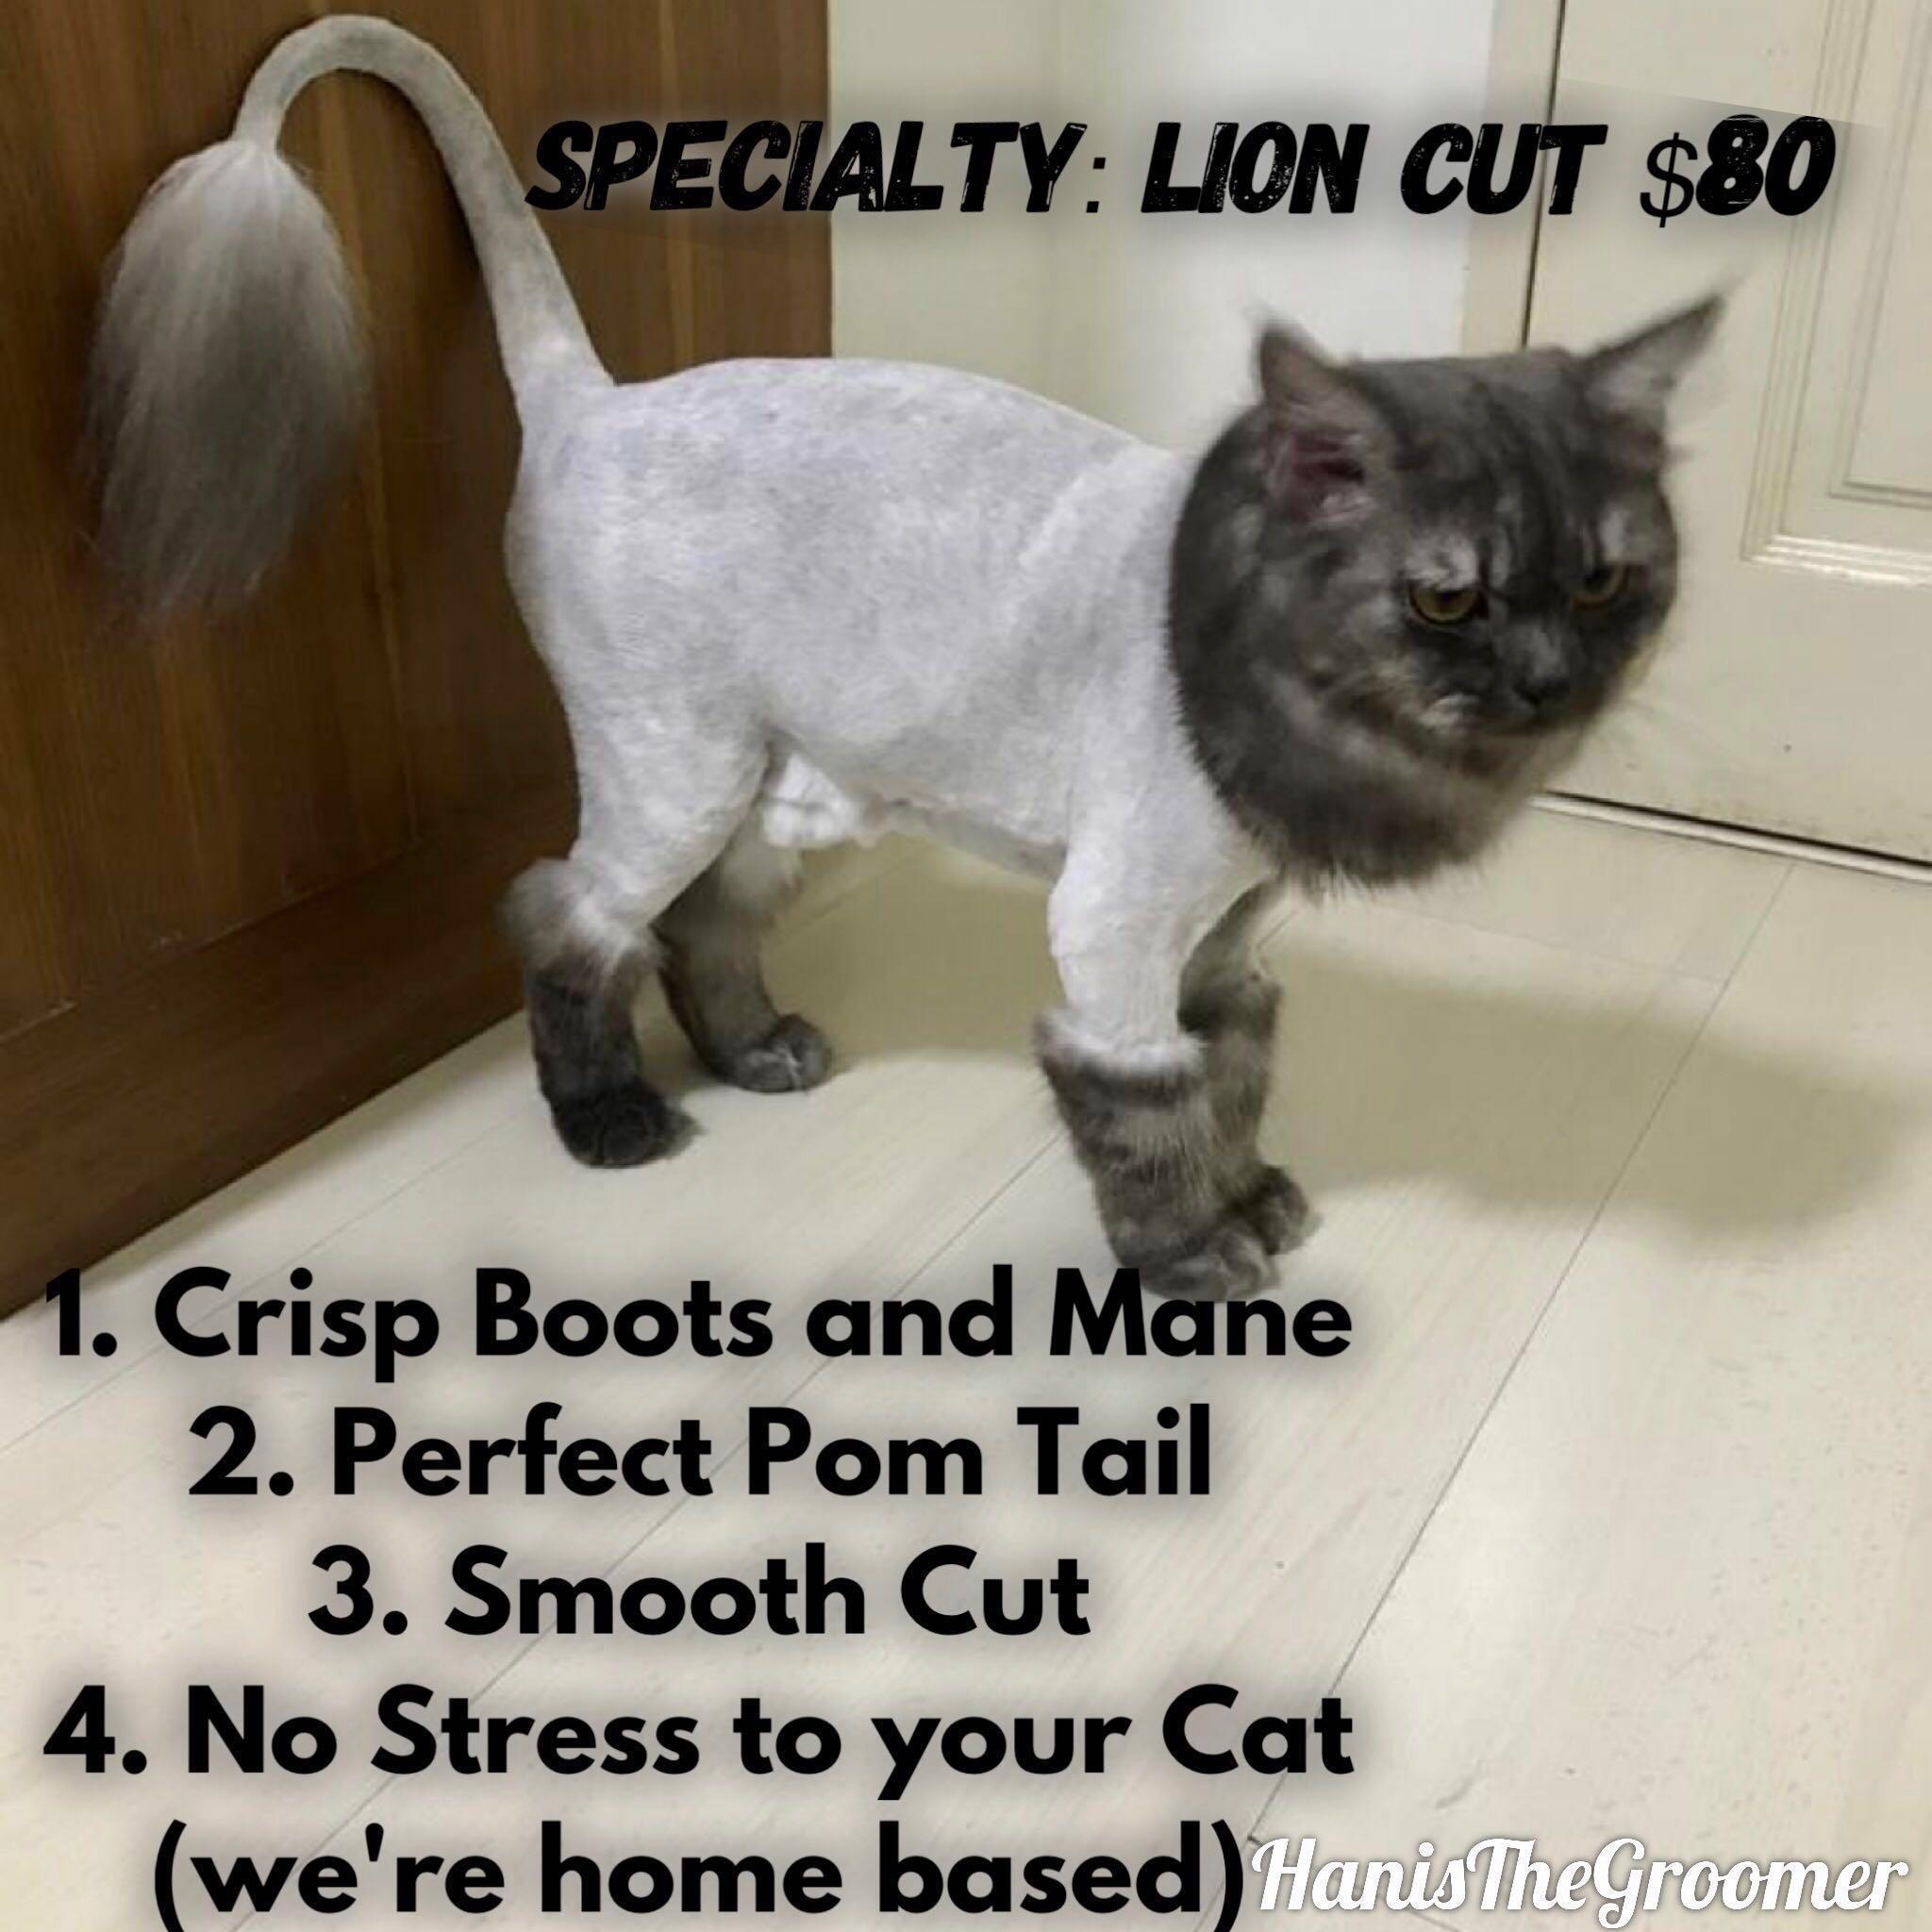 57 HQ Images Lion Cut Cat At Home : Lion Cut Cat Fun And Practical Grooming Technique Or Big Mistake